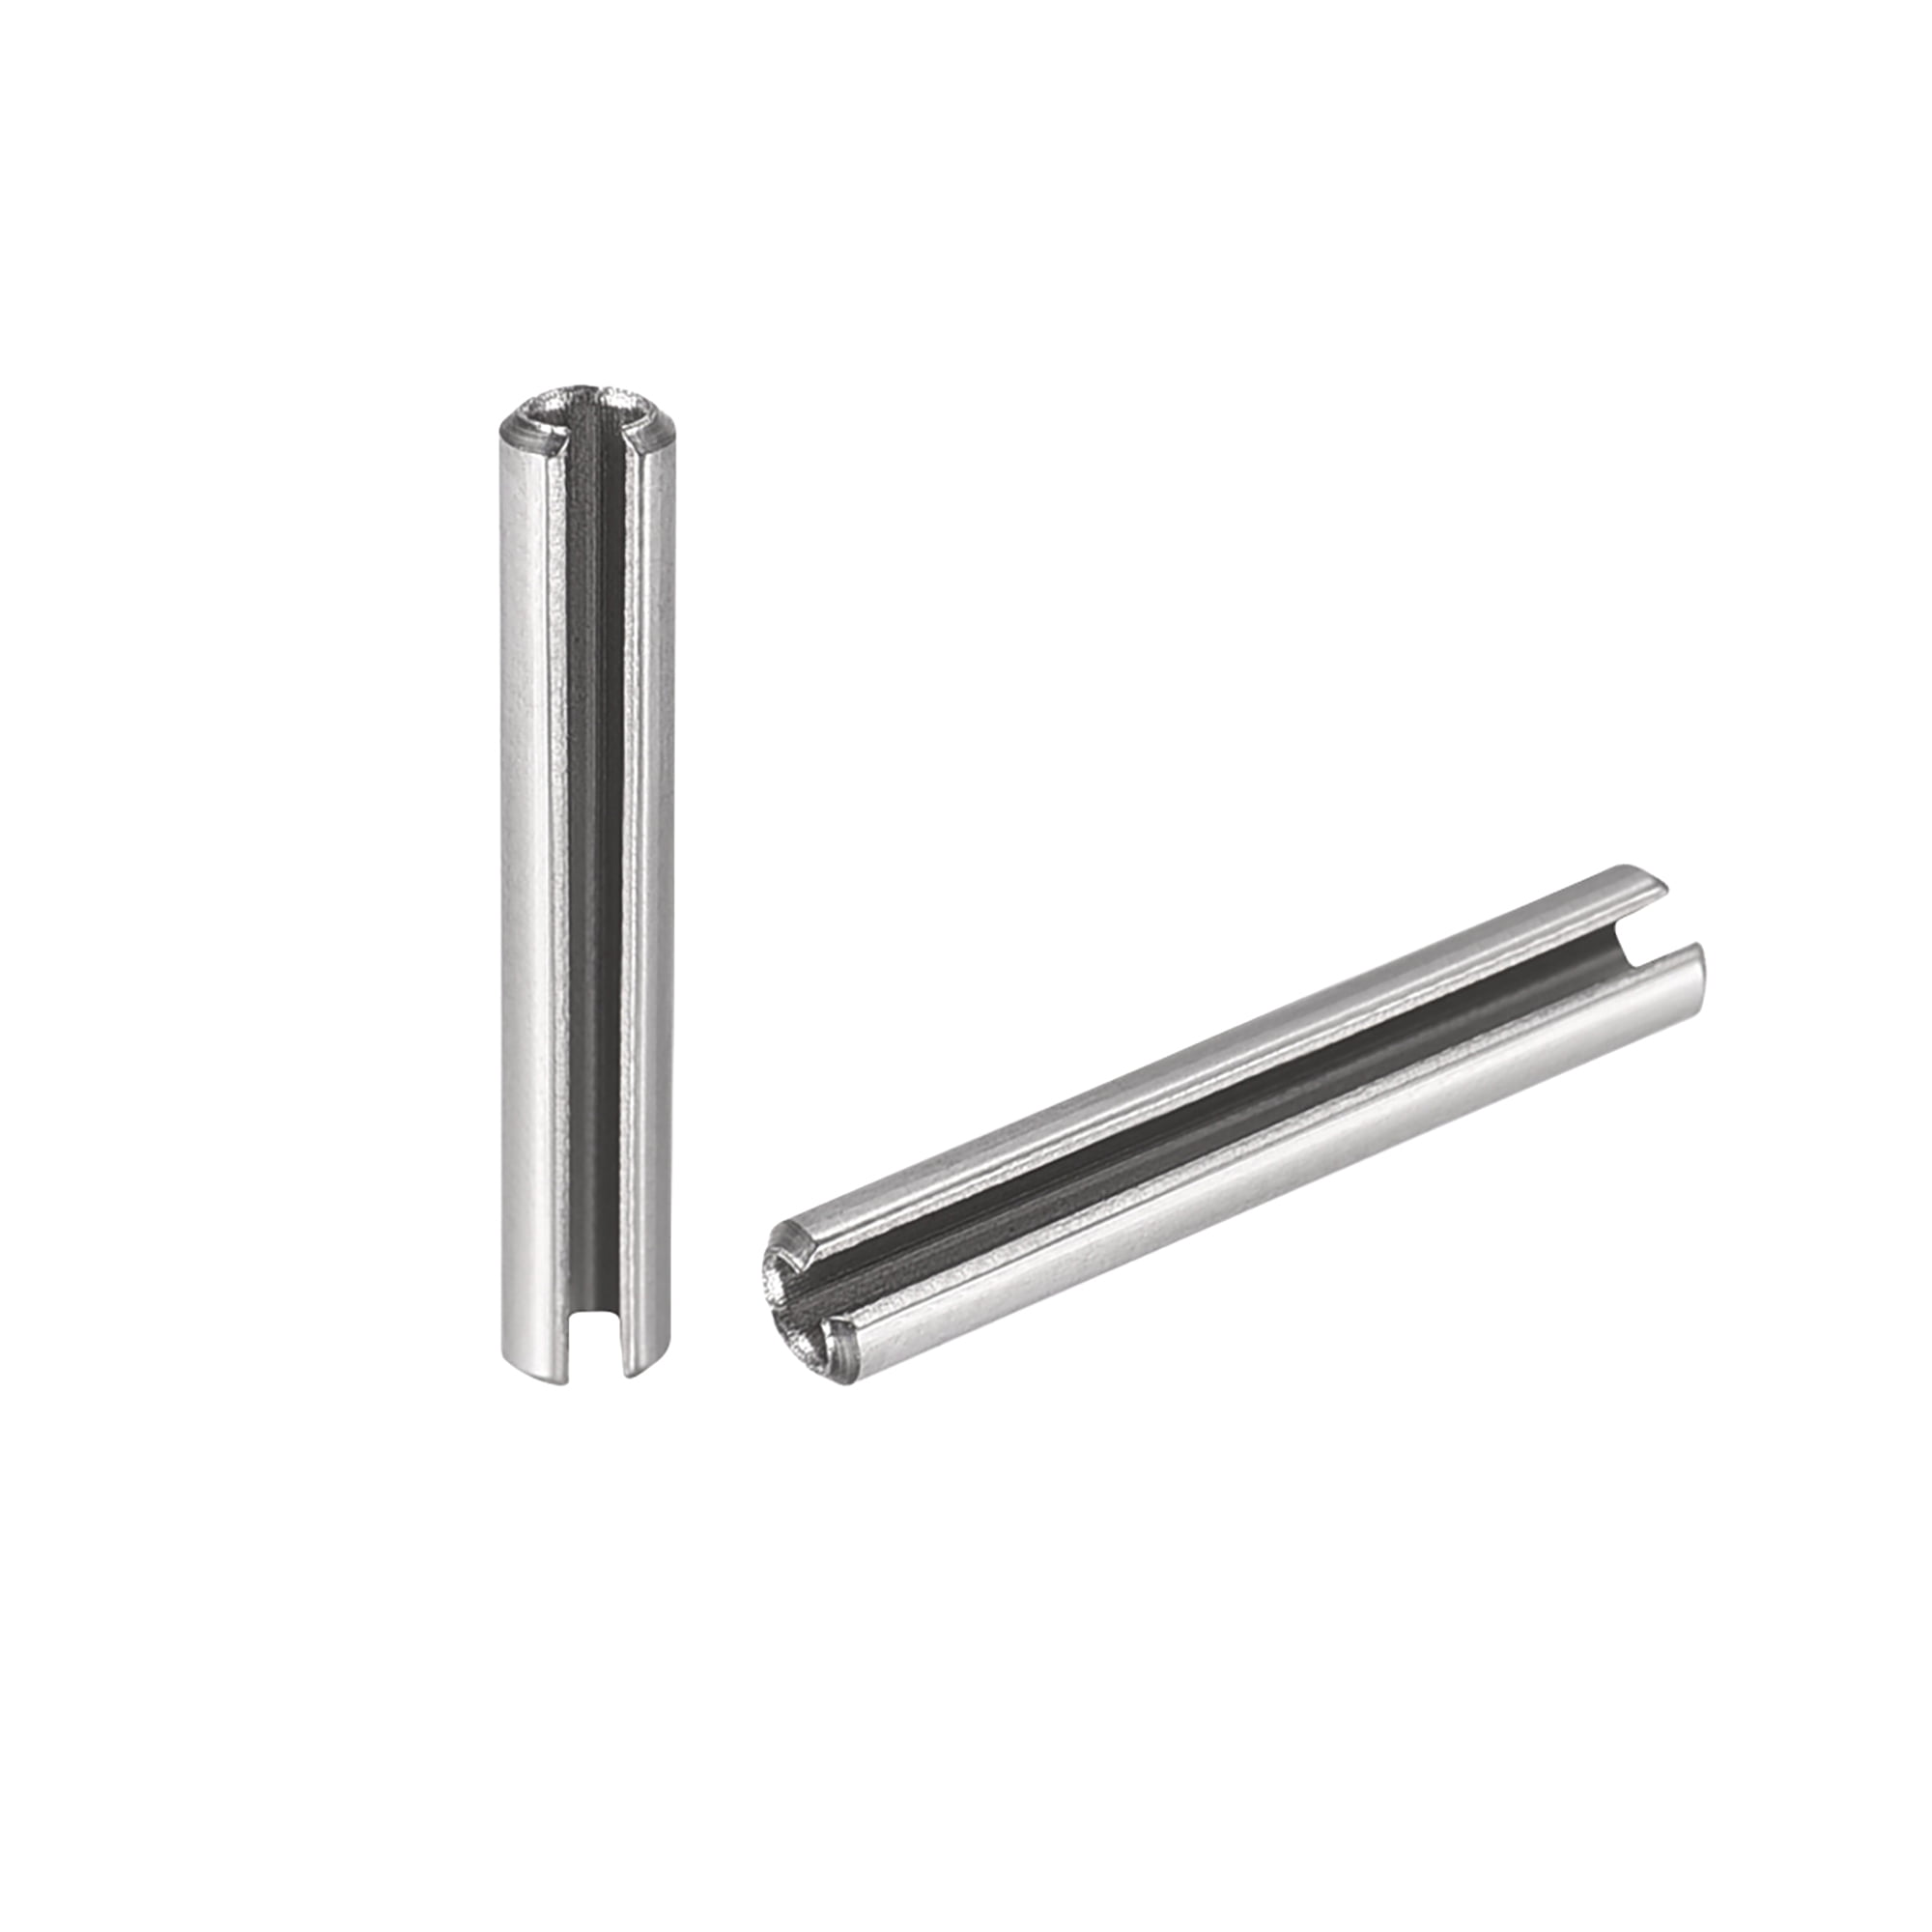 2MM M2 SPRING TENSION PINS SPLIT DOWEL SELLOCK ROLL PINS A2 304 STAINLESS 